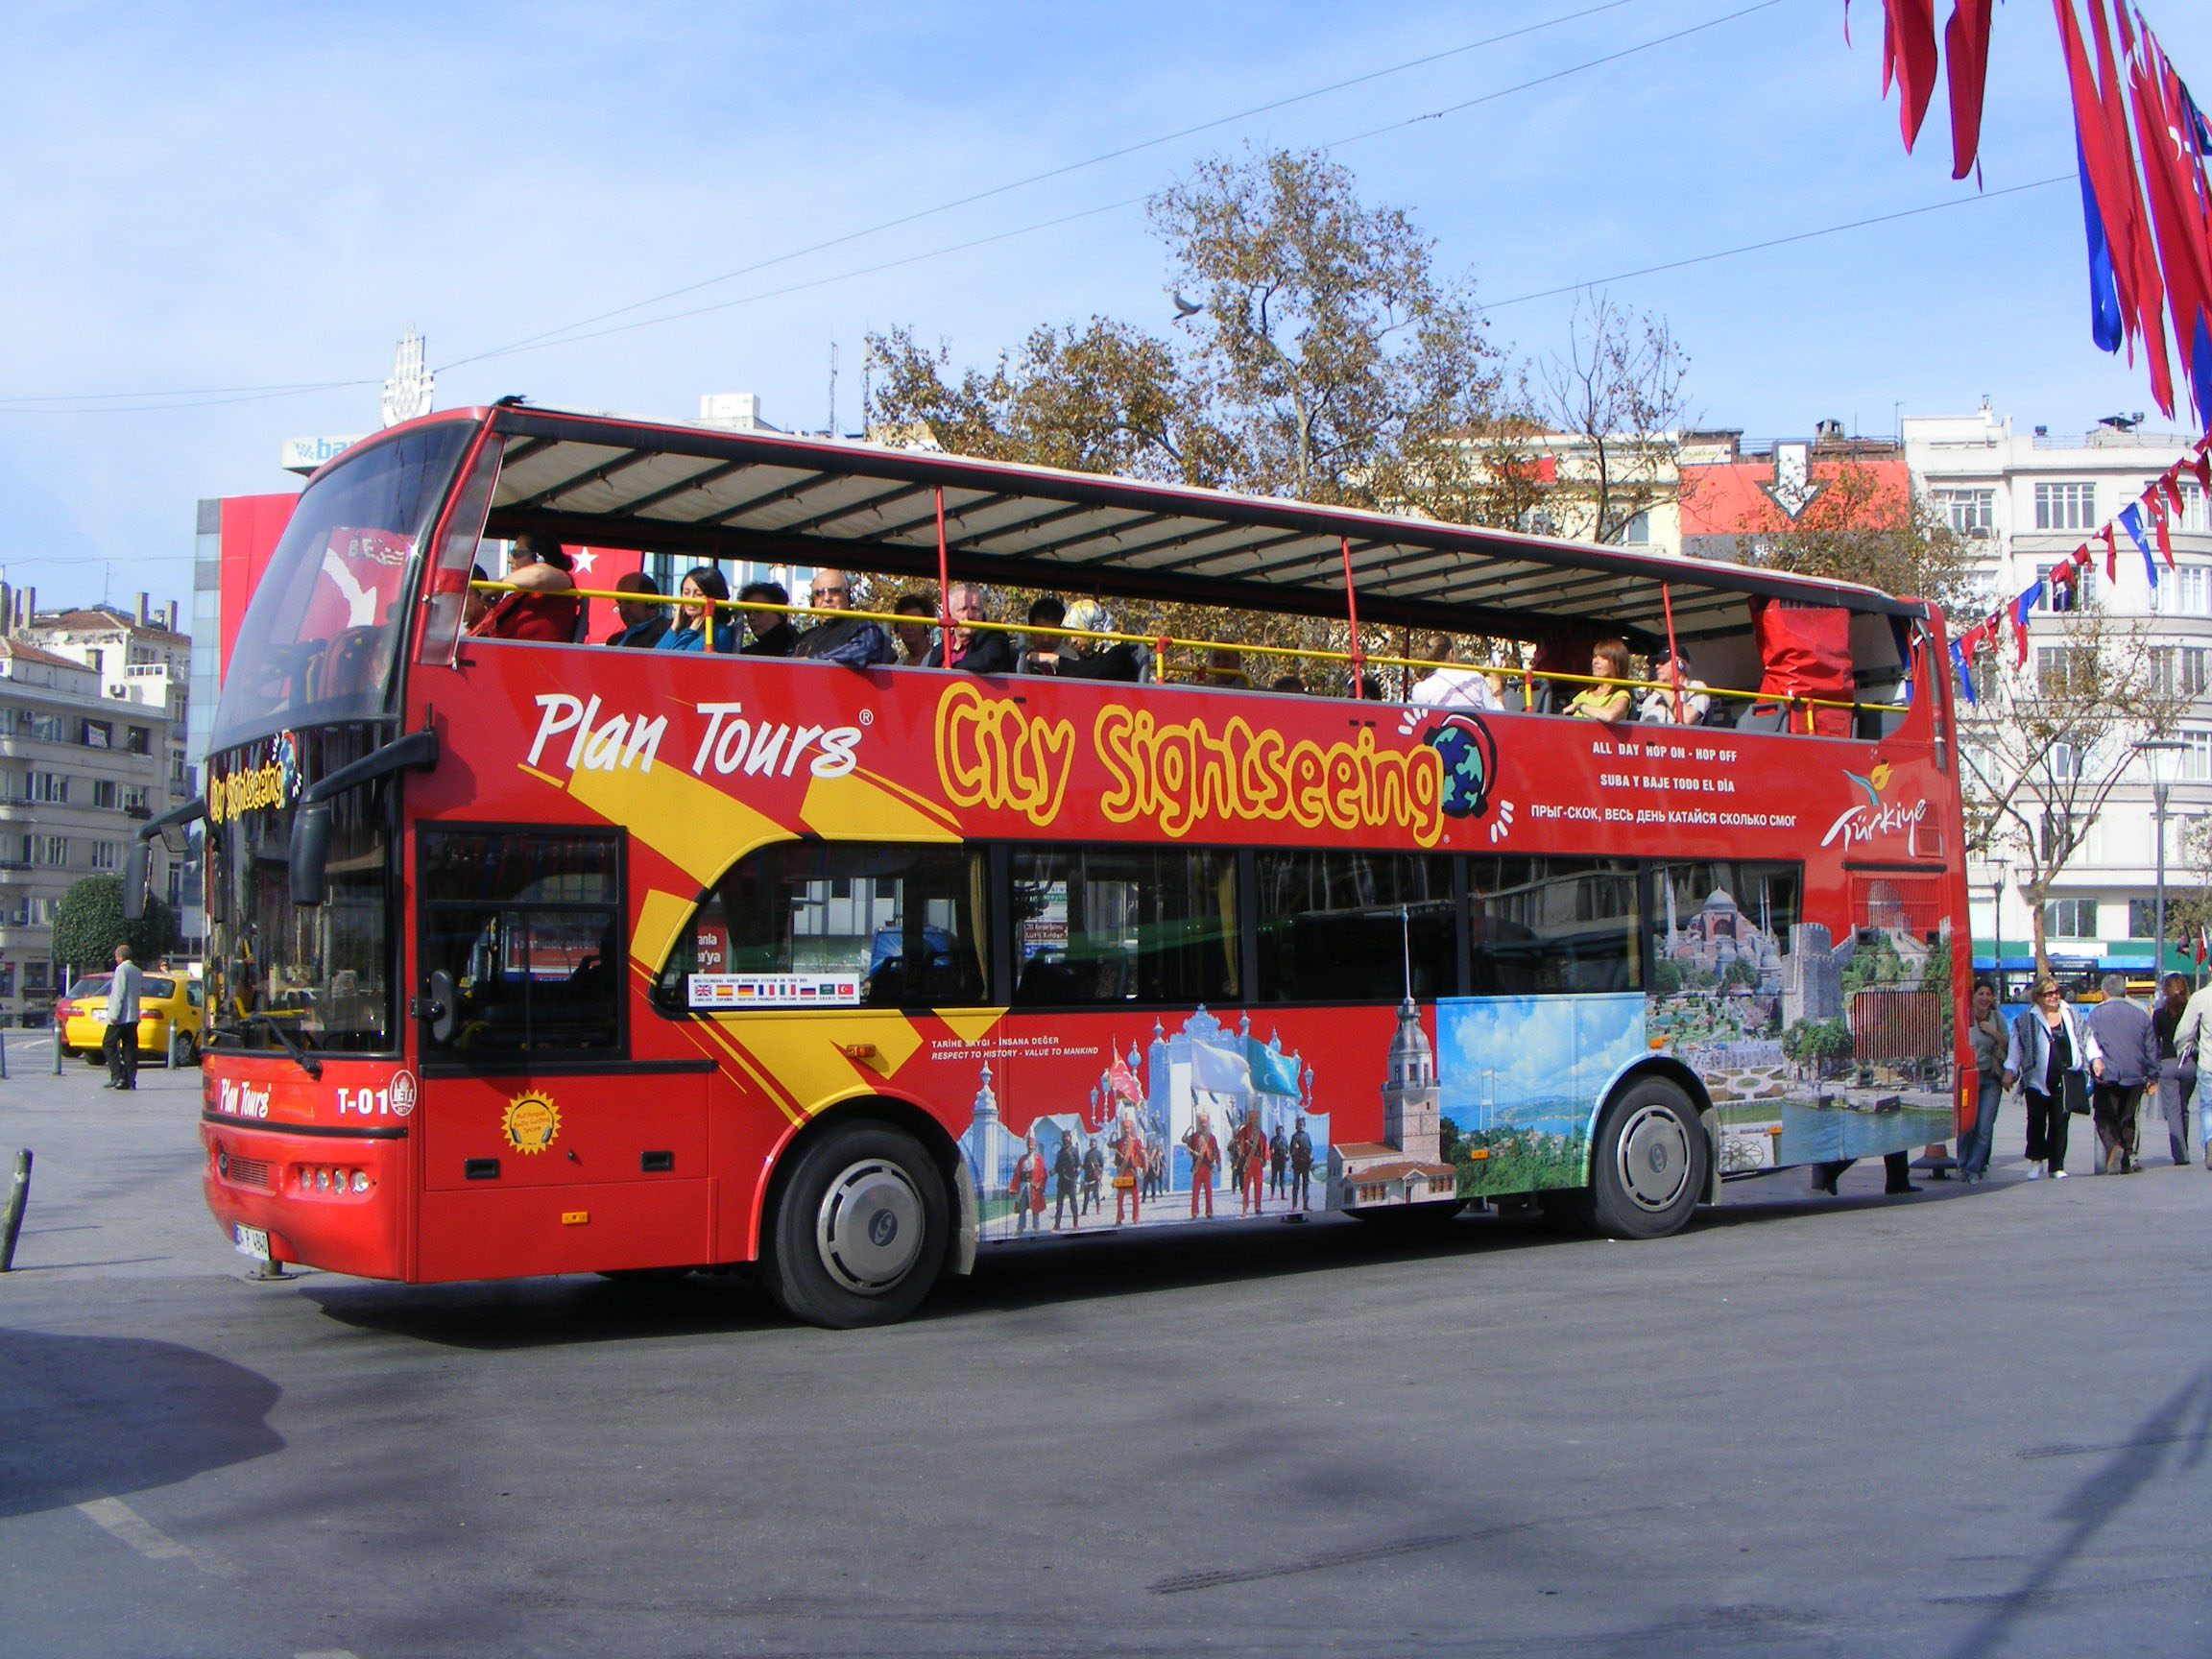 bus city tour in istanbul